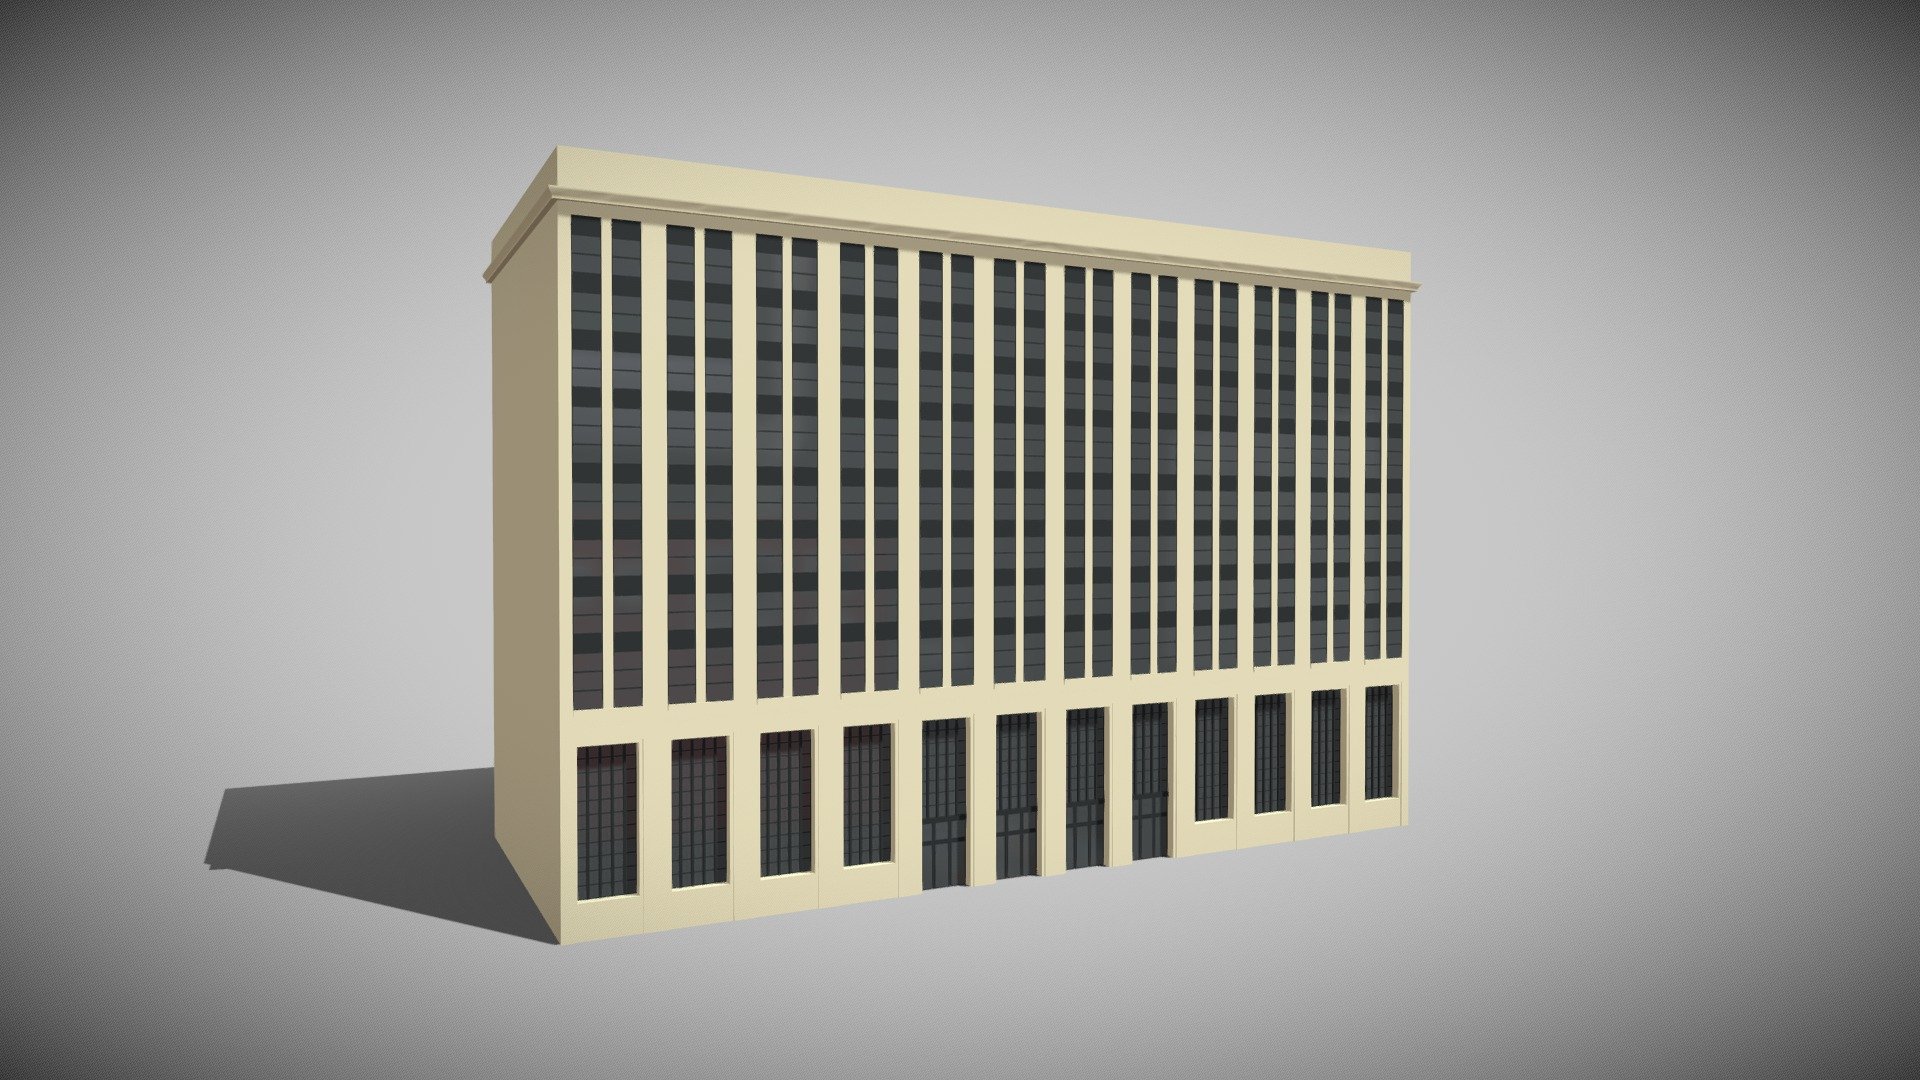 Detailed model of a Commercial Building with no interior, modeled in Cinema 4D.The model was created using approximate real world dimensions.

The model has 15,539 polys and 20,232 vertices.

An additional file has been provided containing the original Cinema 4D project files and other 3d export files such as 3ds, fbx and obj 3d model